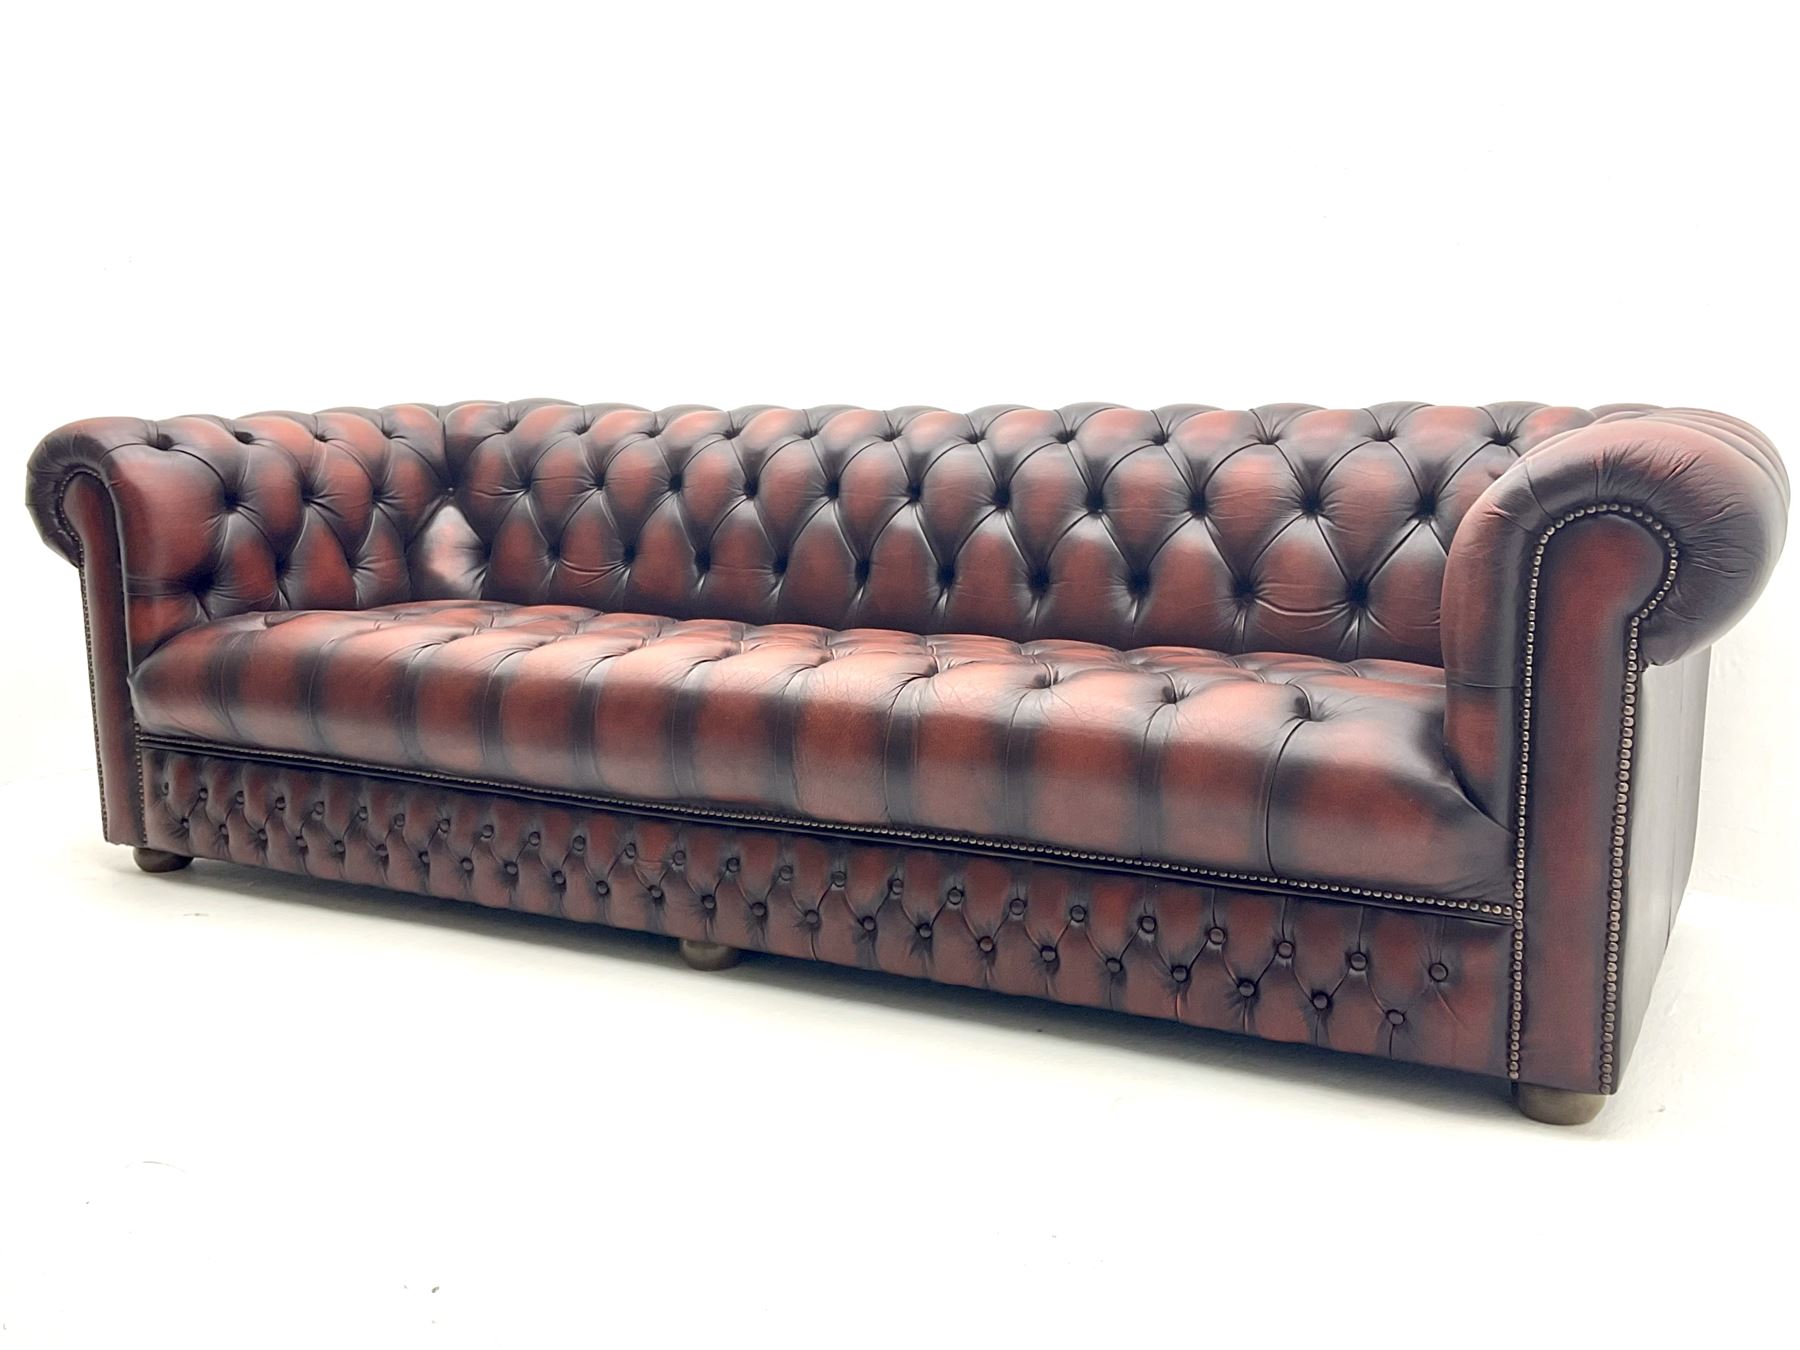 Large four seat Chesterfield sofa upholstered in buttoned brown leather